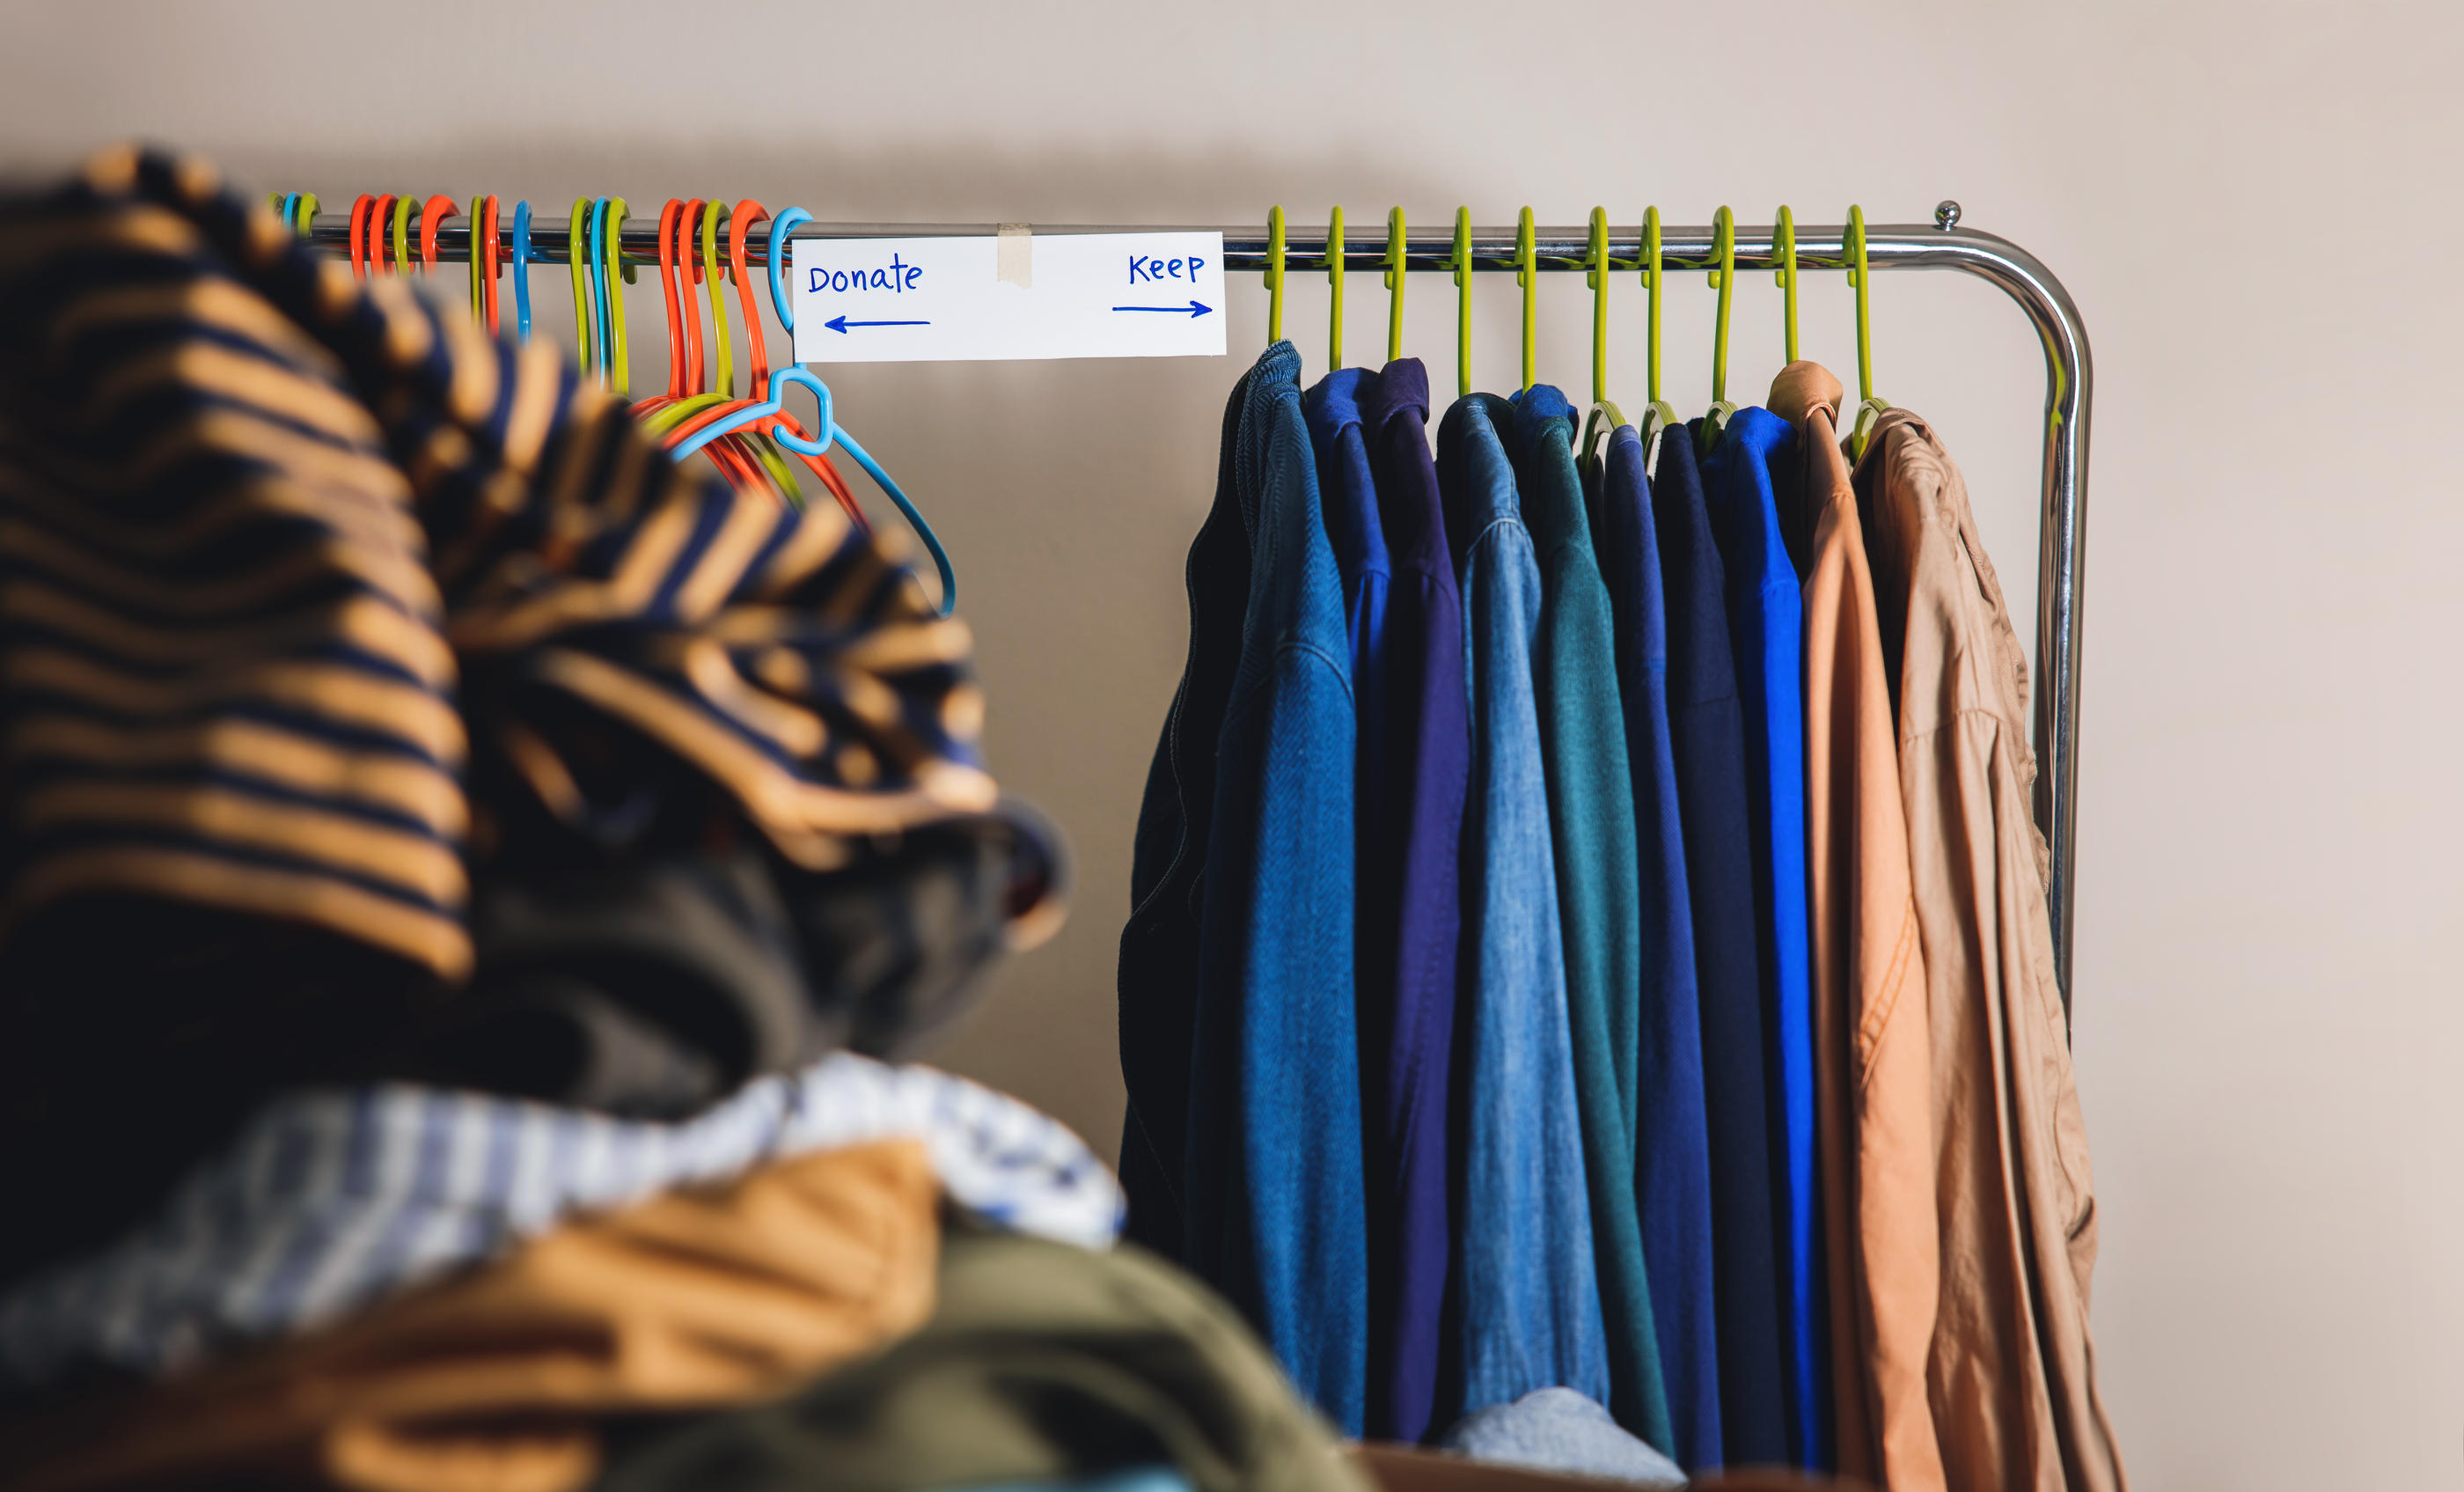 How to donate your old clothes - Reviewed